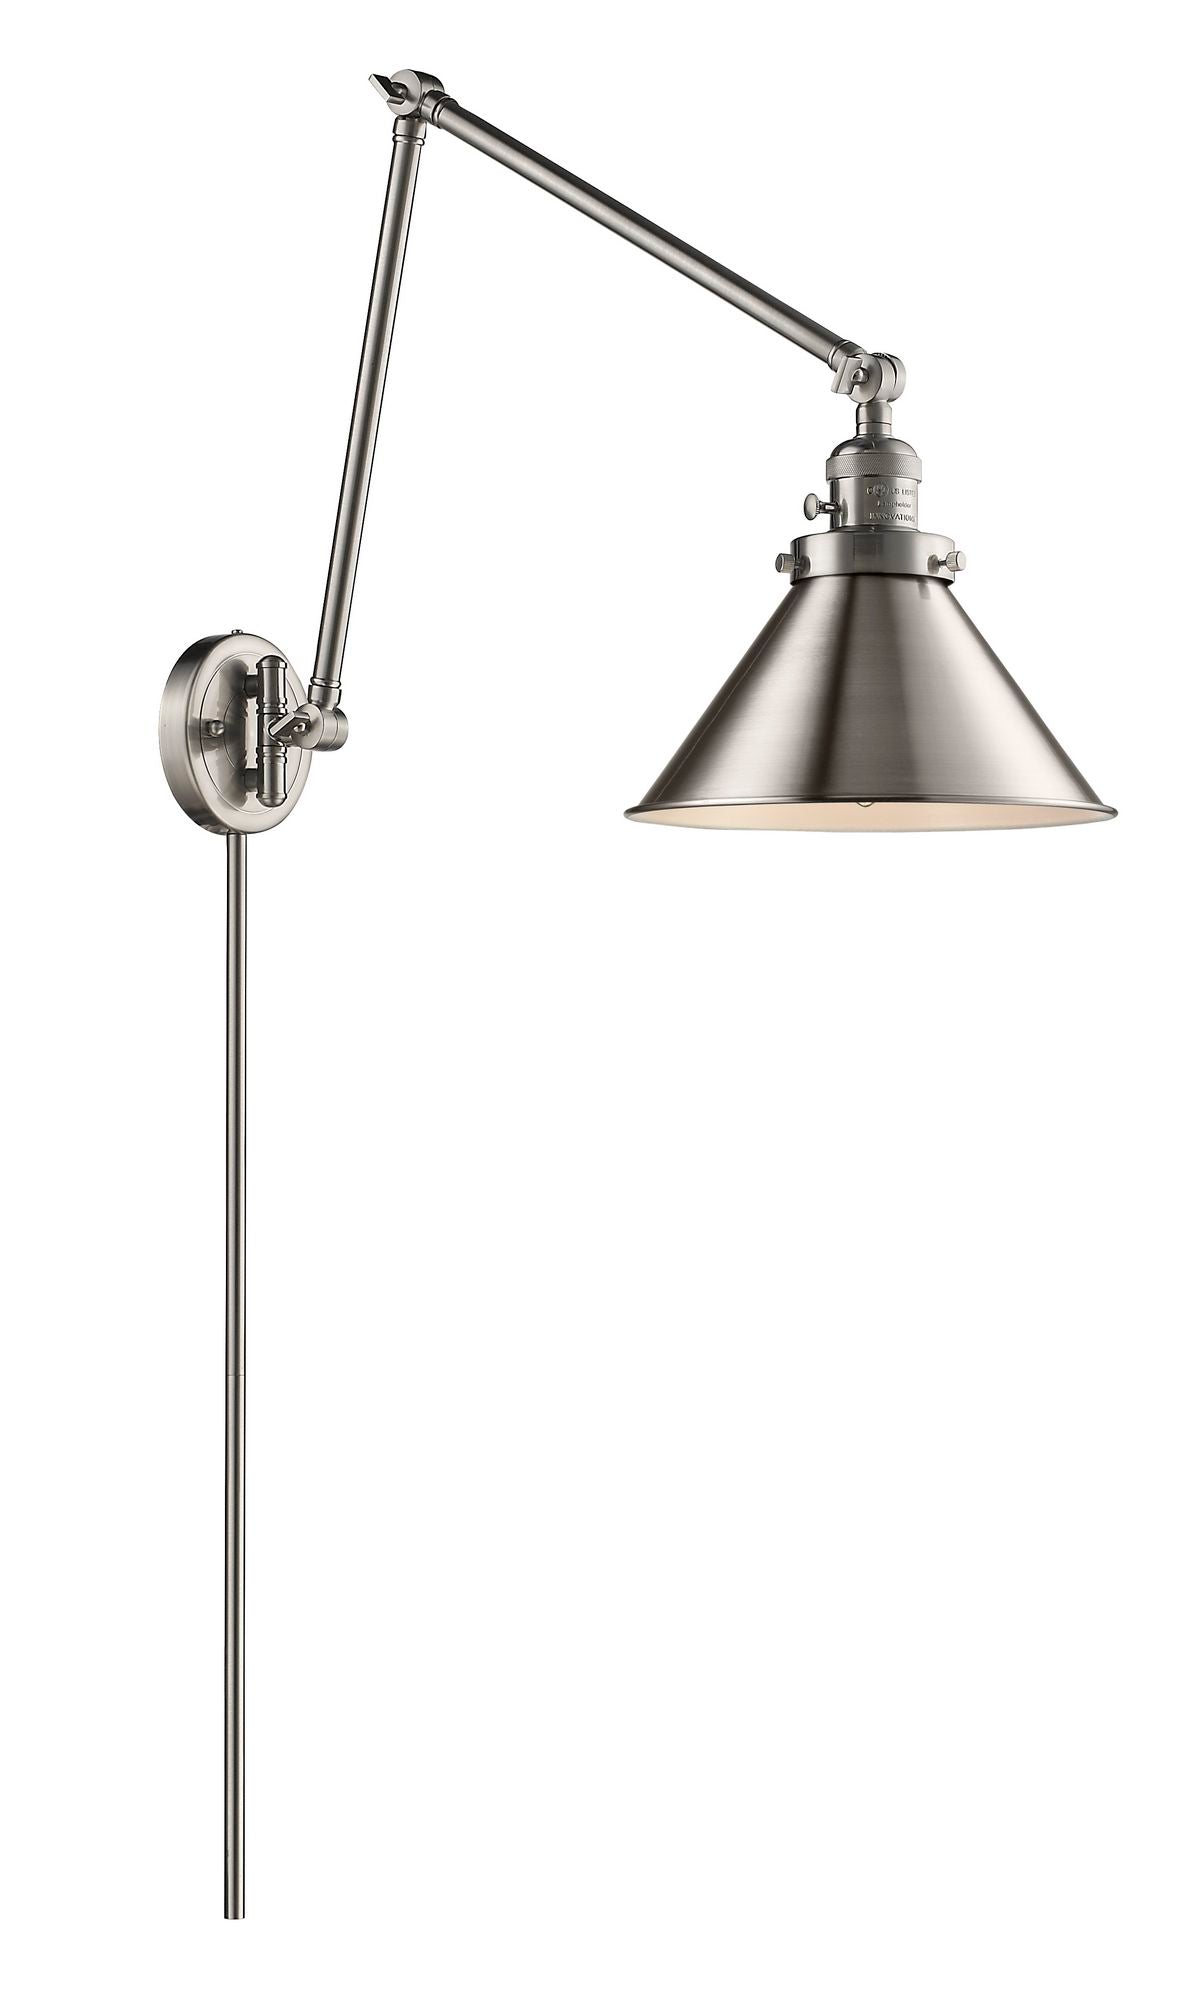 1-Light 10" Brushed Satin Nickel Swing Arm - Brushed Satin Nickel Briarcliff Shade - Incandesent Or LED Bulbs